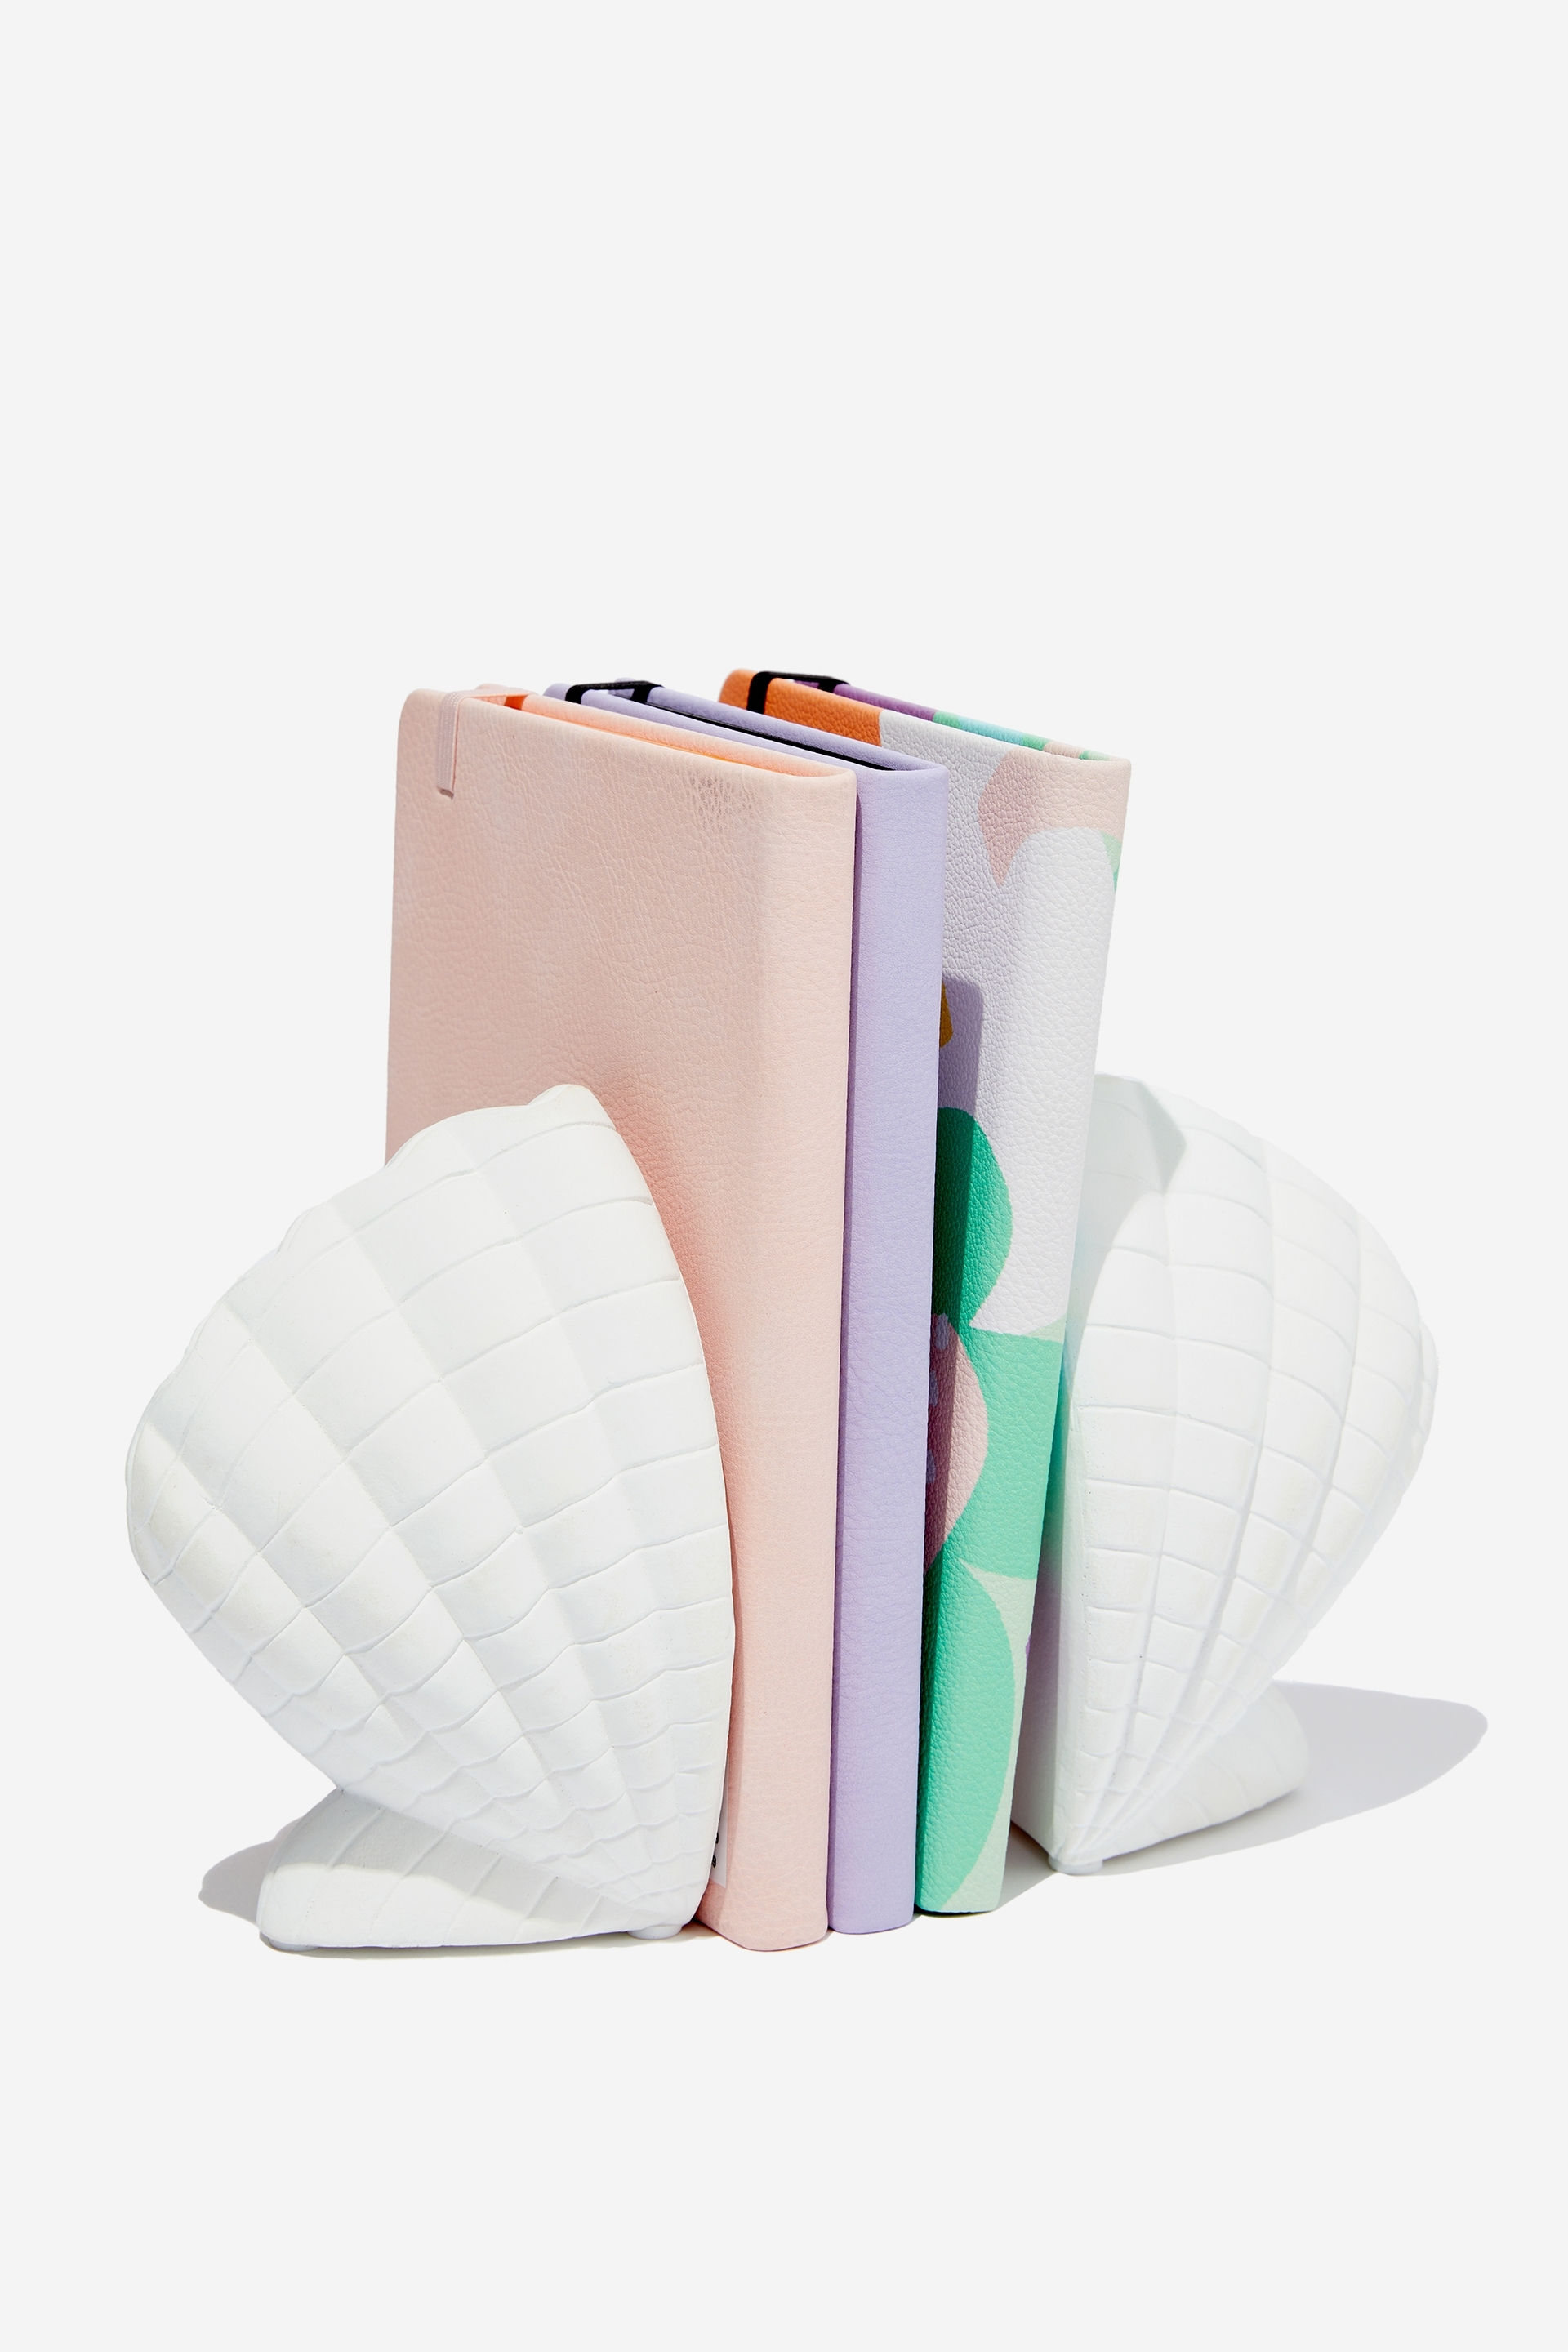 Typo - Blocked In Book Holder - Shell